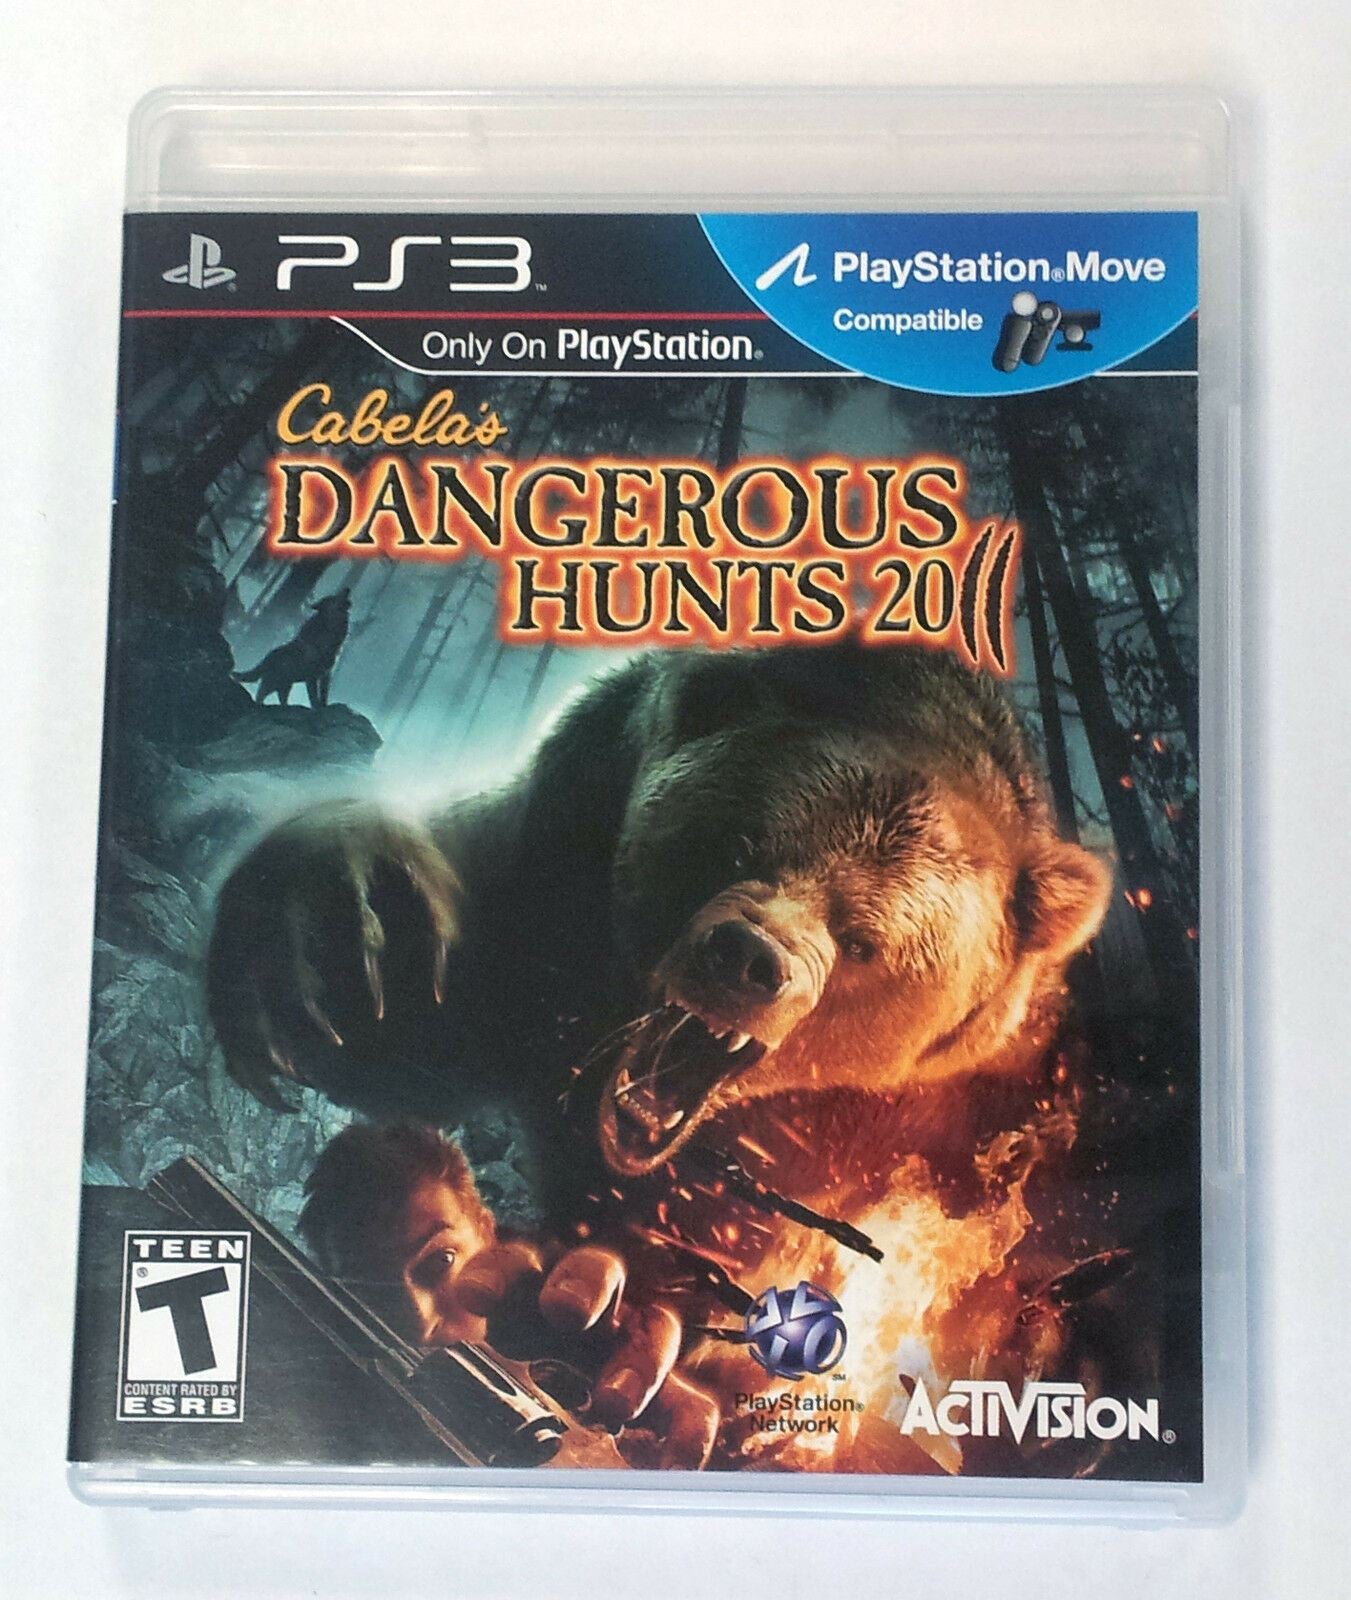 Cabela's Dangerous Hunts 2011 PS3 PlayStation 3 Game ONLY (Gun NOT Included) [Used/Refurbished]